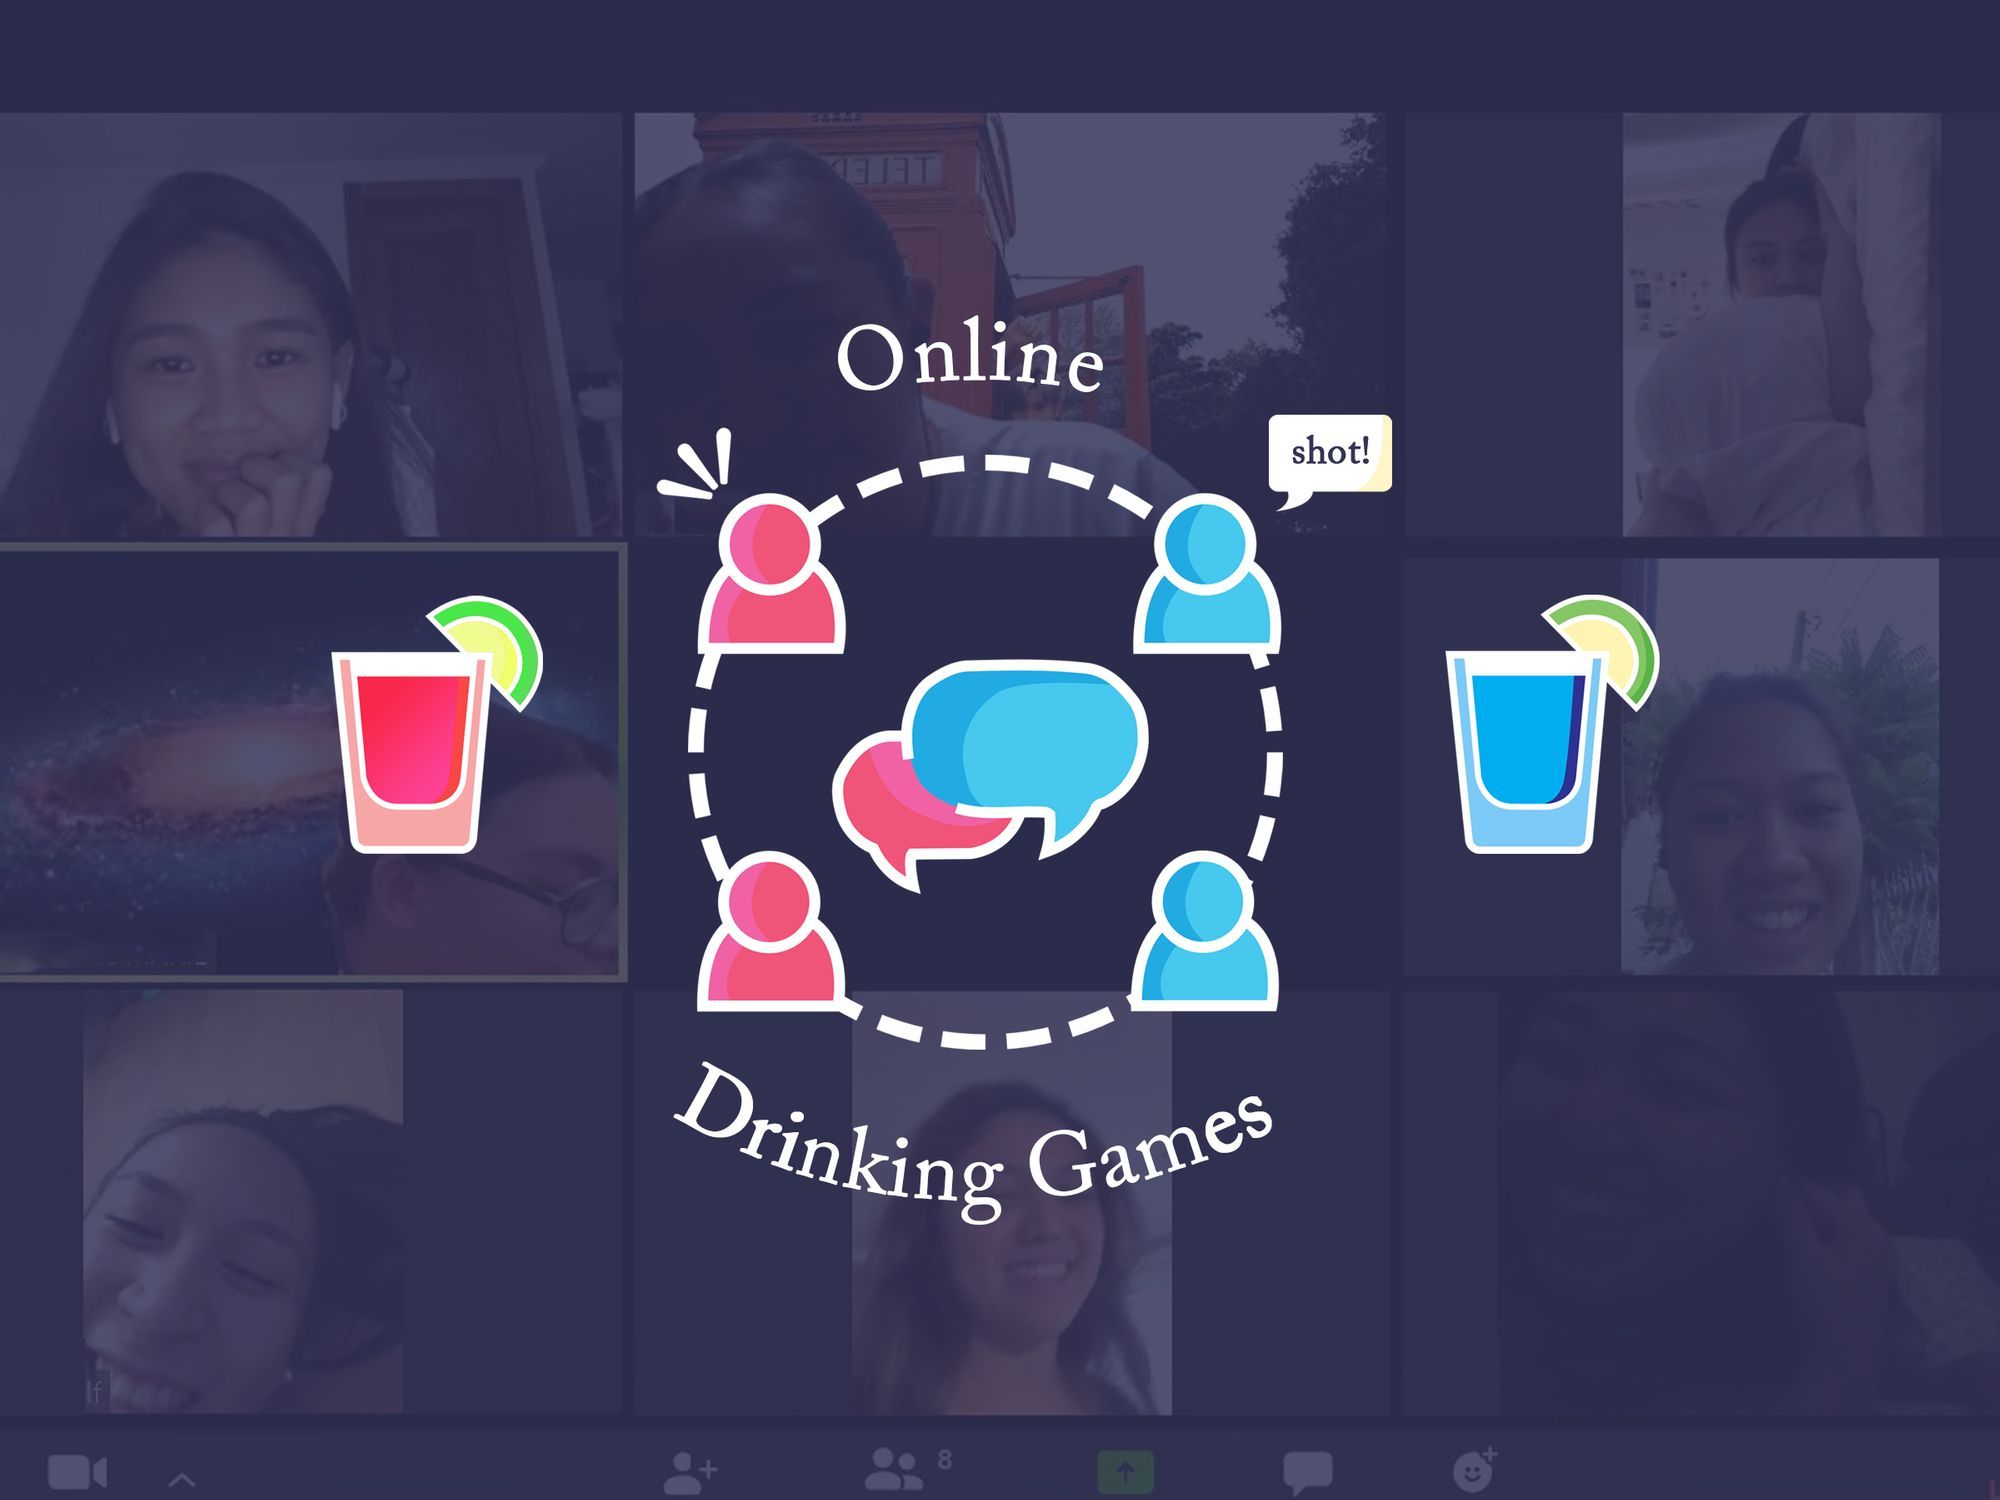 Play these Fun Online Drinking Games with Friends